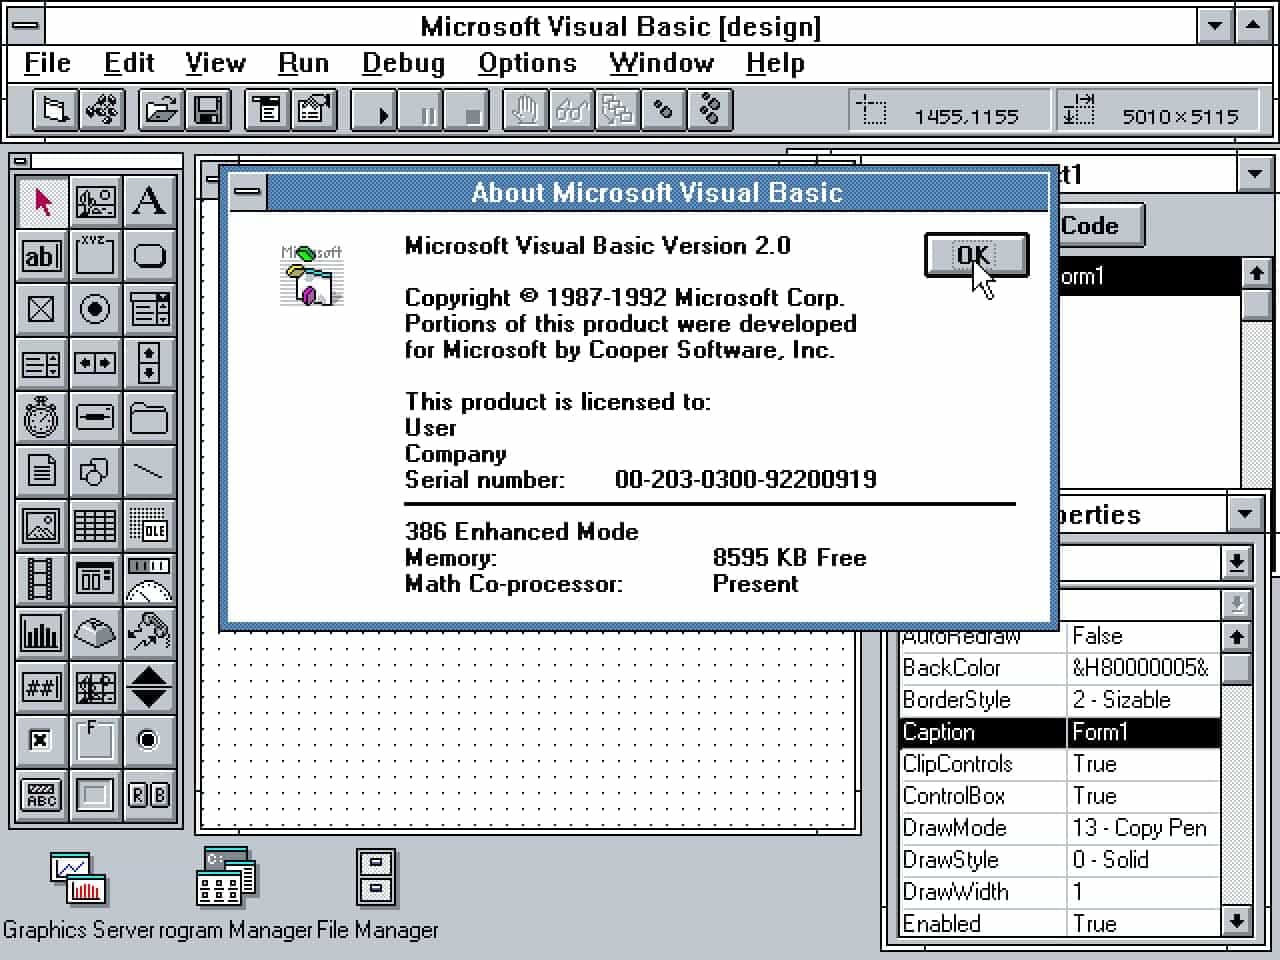 A screenshot showing the Visual Basic 2.0 starting interface. There are 36 buttons in the left panel along with other new controls. There's also a row of buttons on the top of the screen.